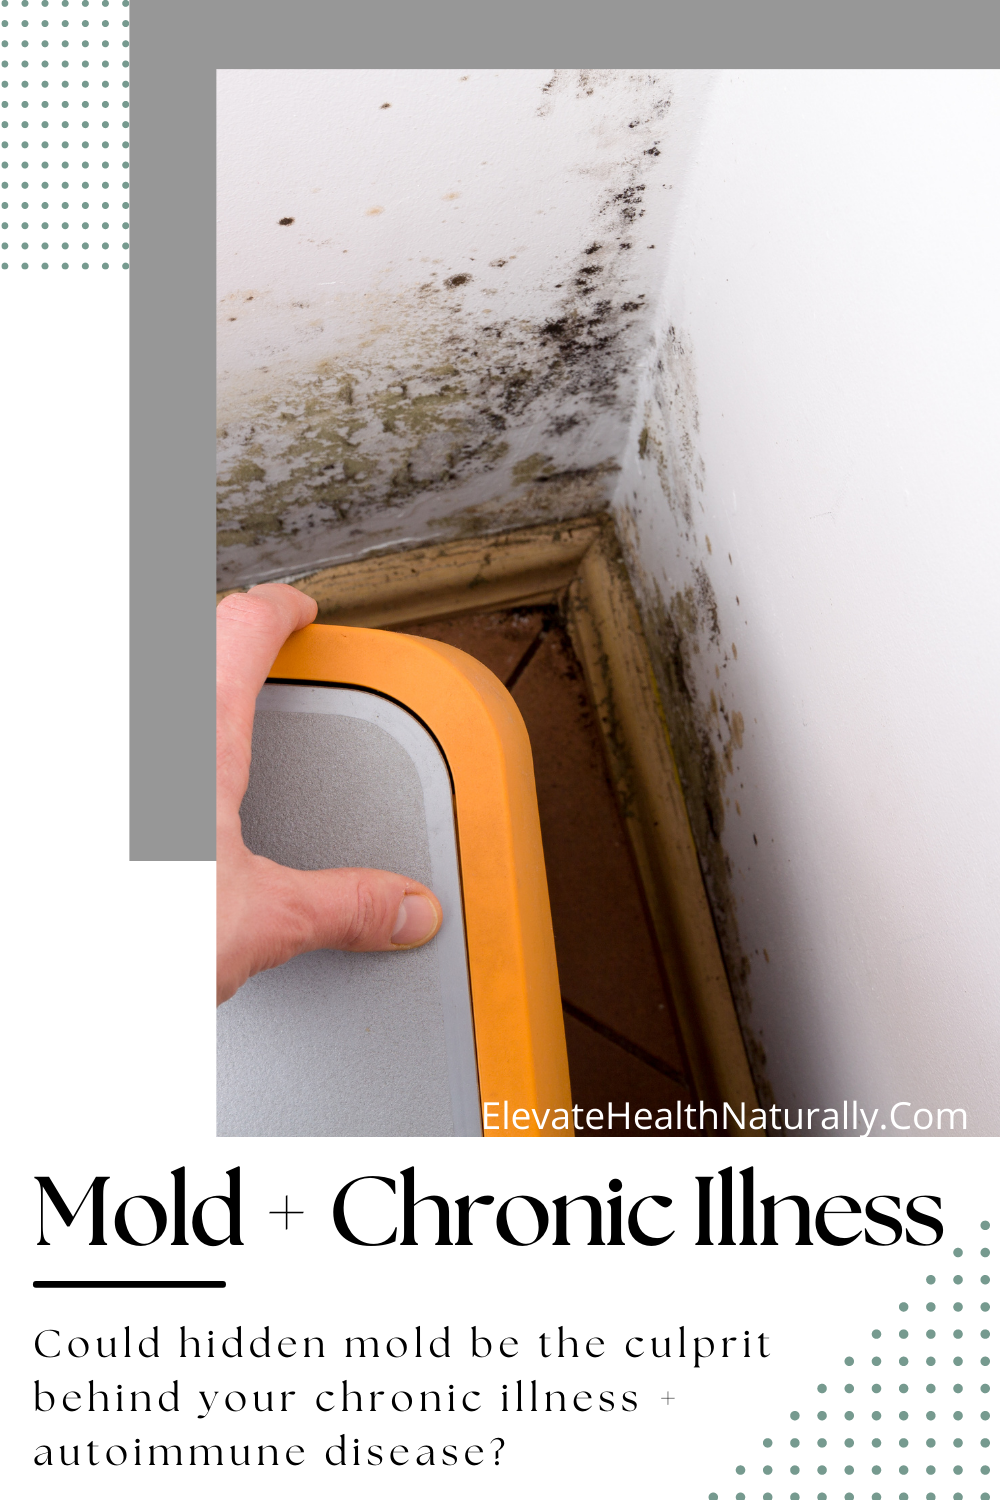 10 Warning Signs of Mold Toxicity